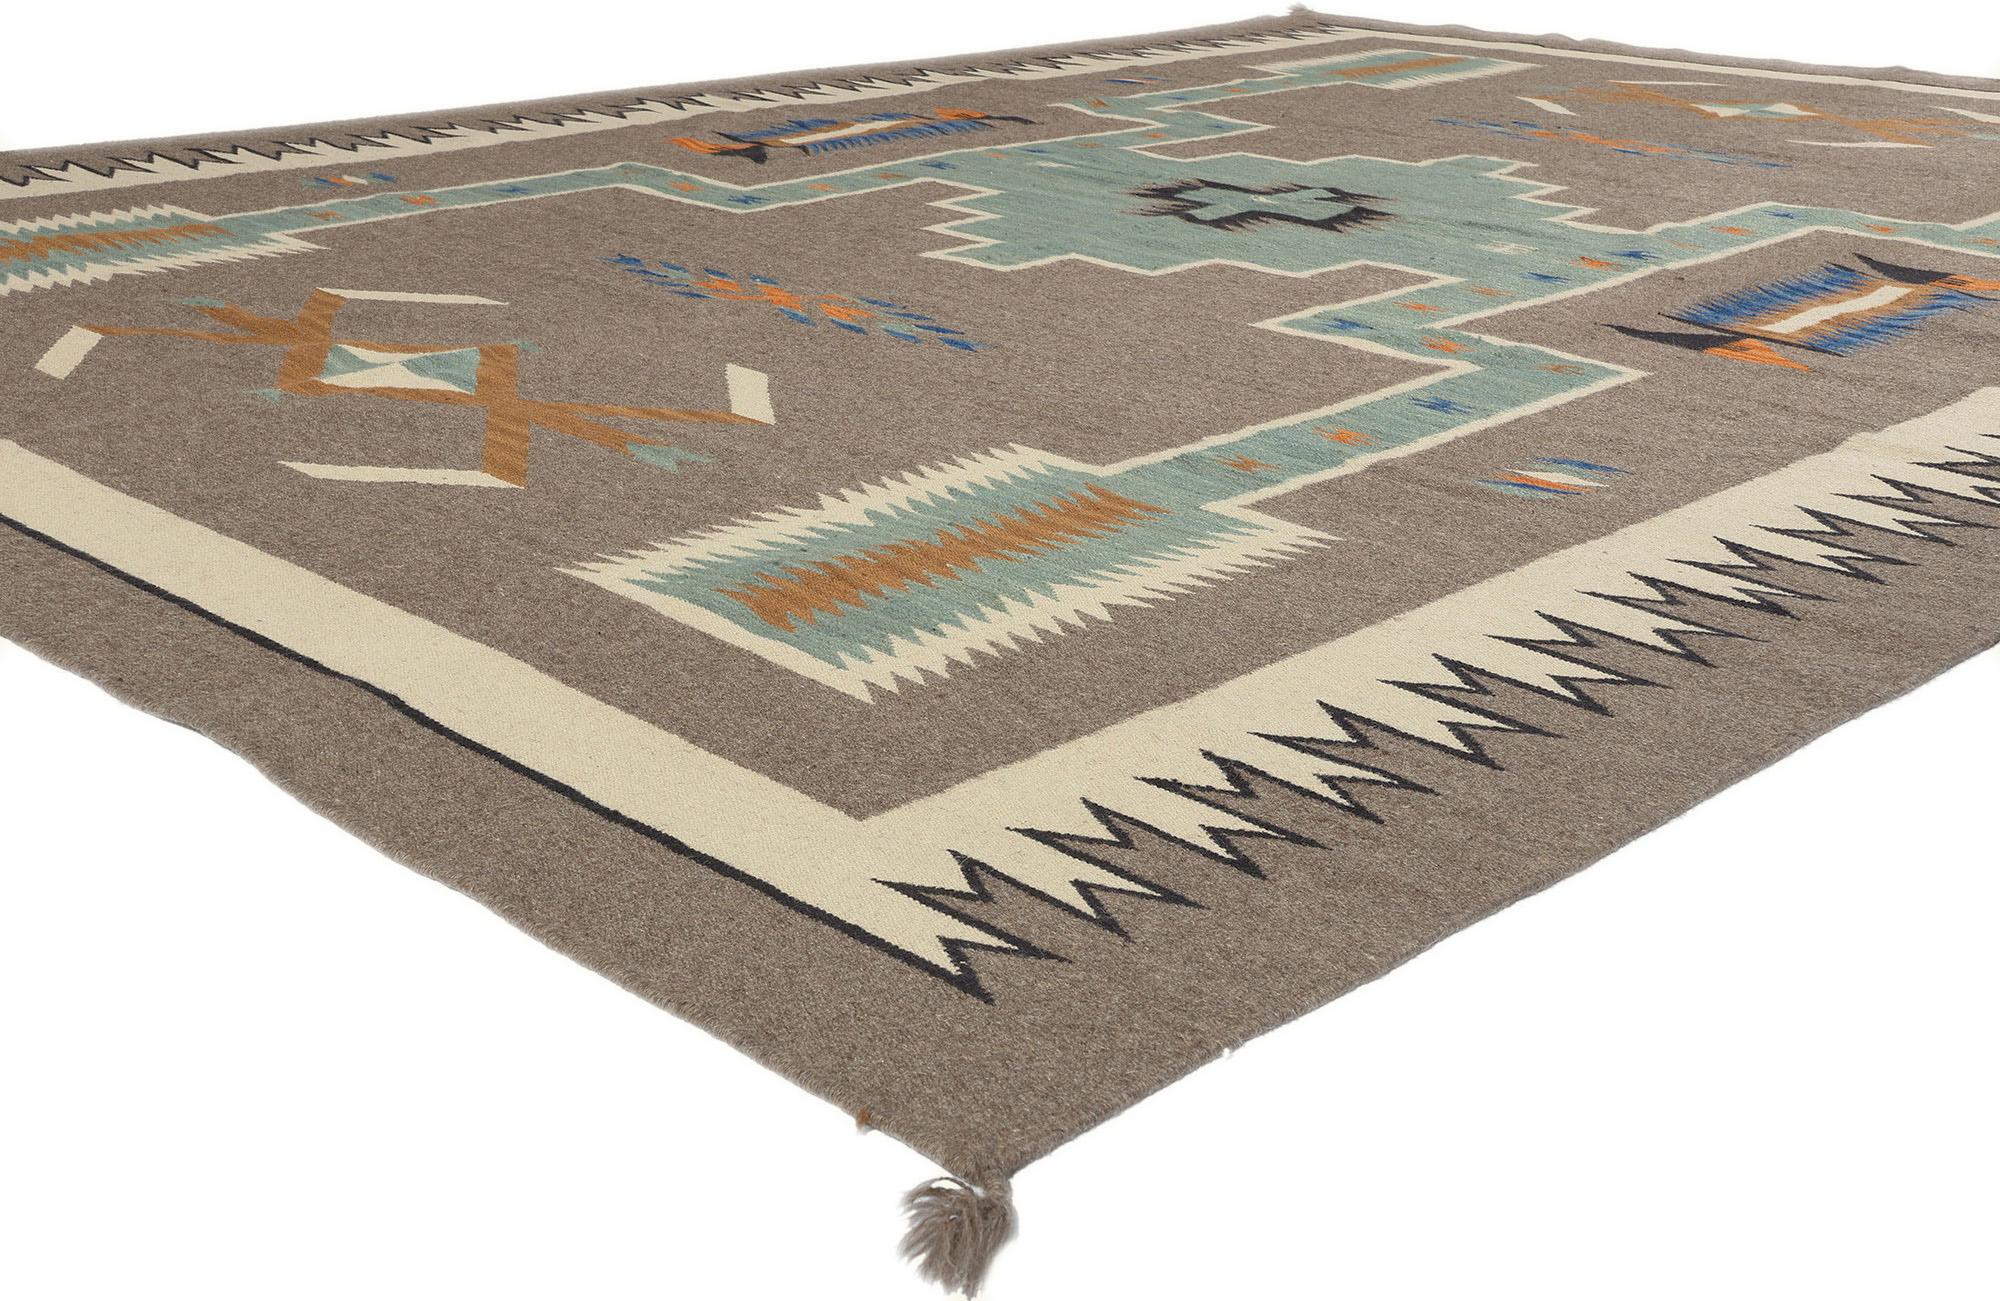 81026 Southwestern Navajo-Style Rug with Storm Pattern, 08'10 x 12'03. Embark on a magical journey through the enchanting fusion of Santa Fe and Southwestern styles within this meticulously handwoven Navajo-inspired rug, unveiling the timeless